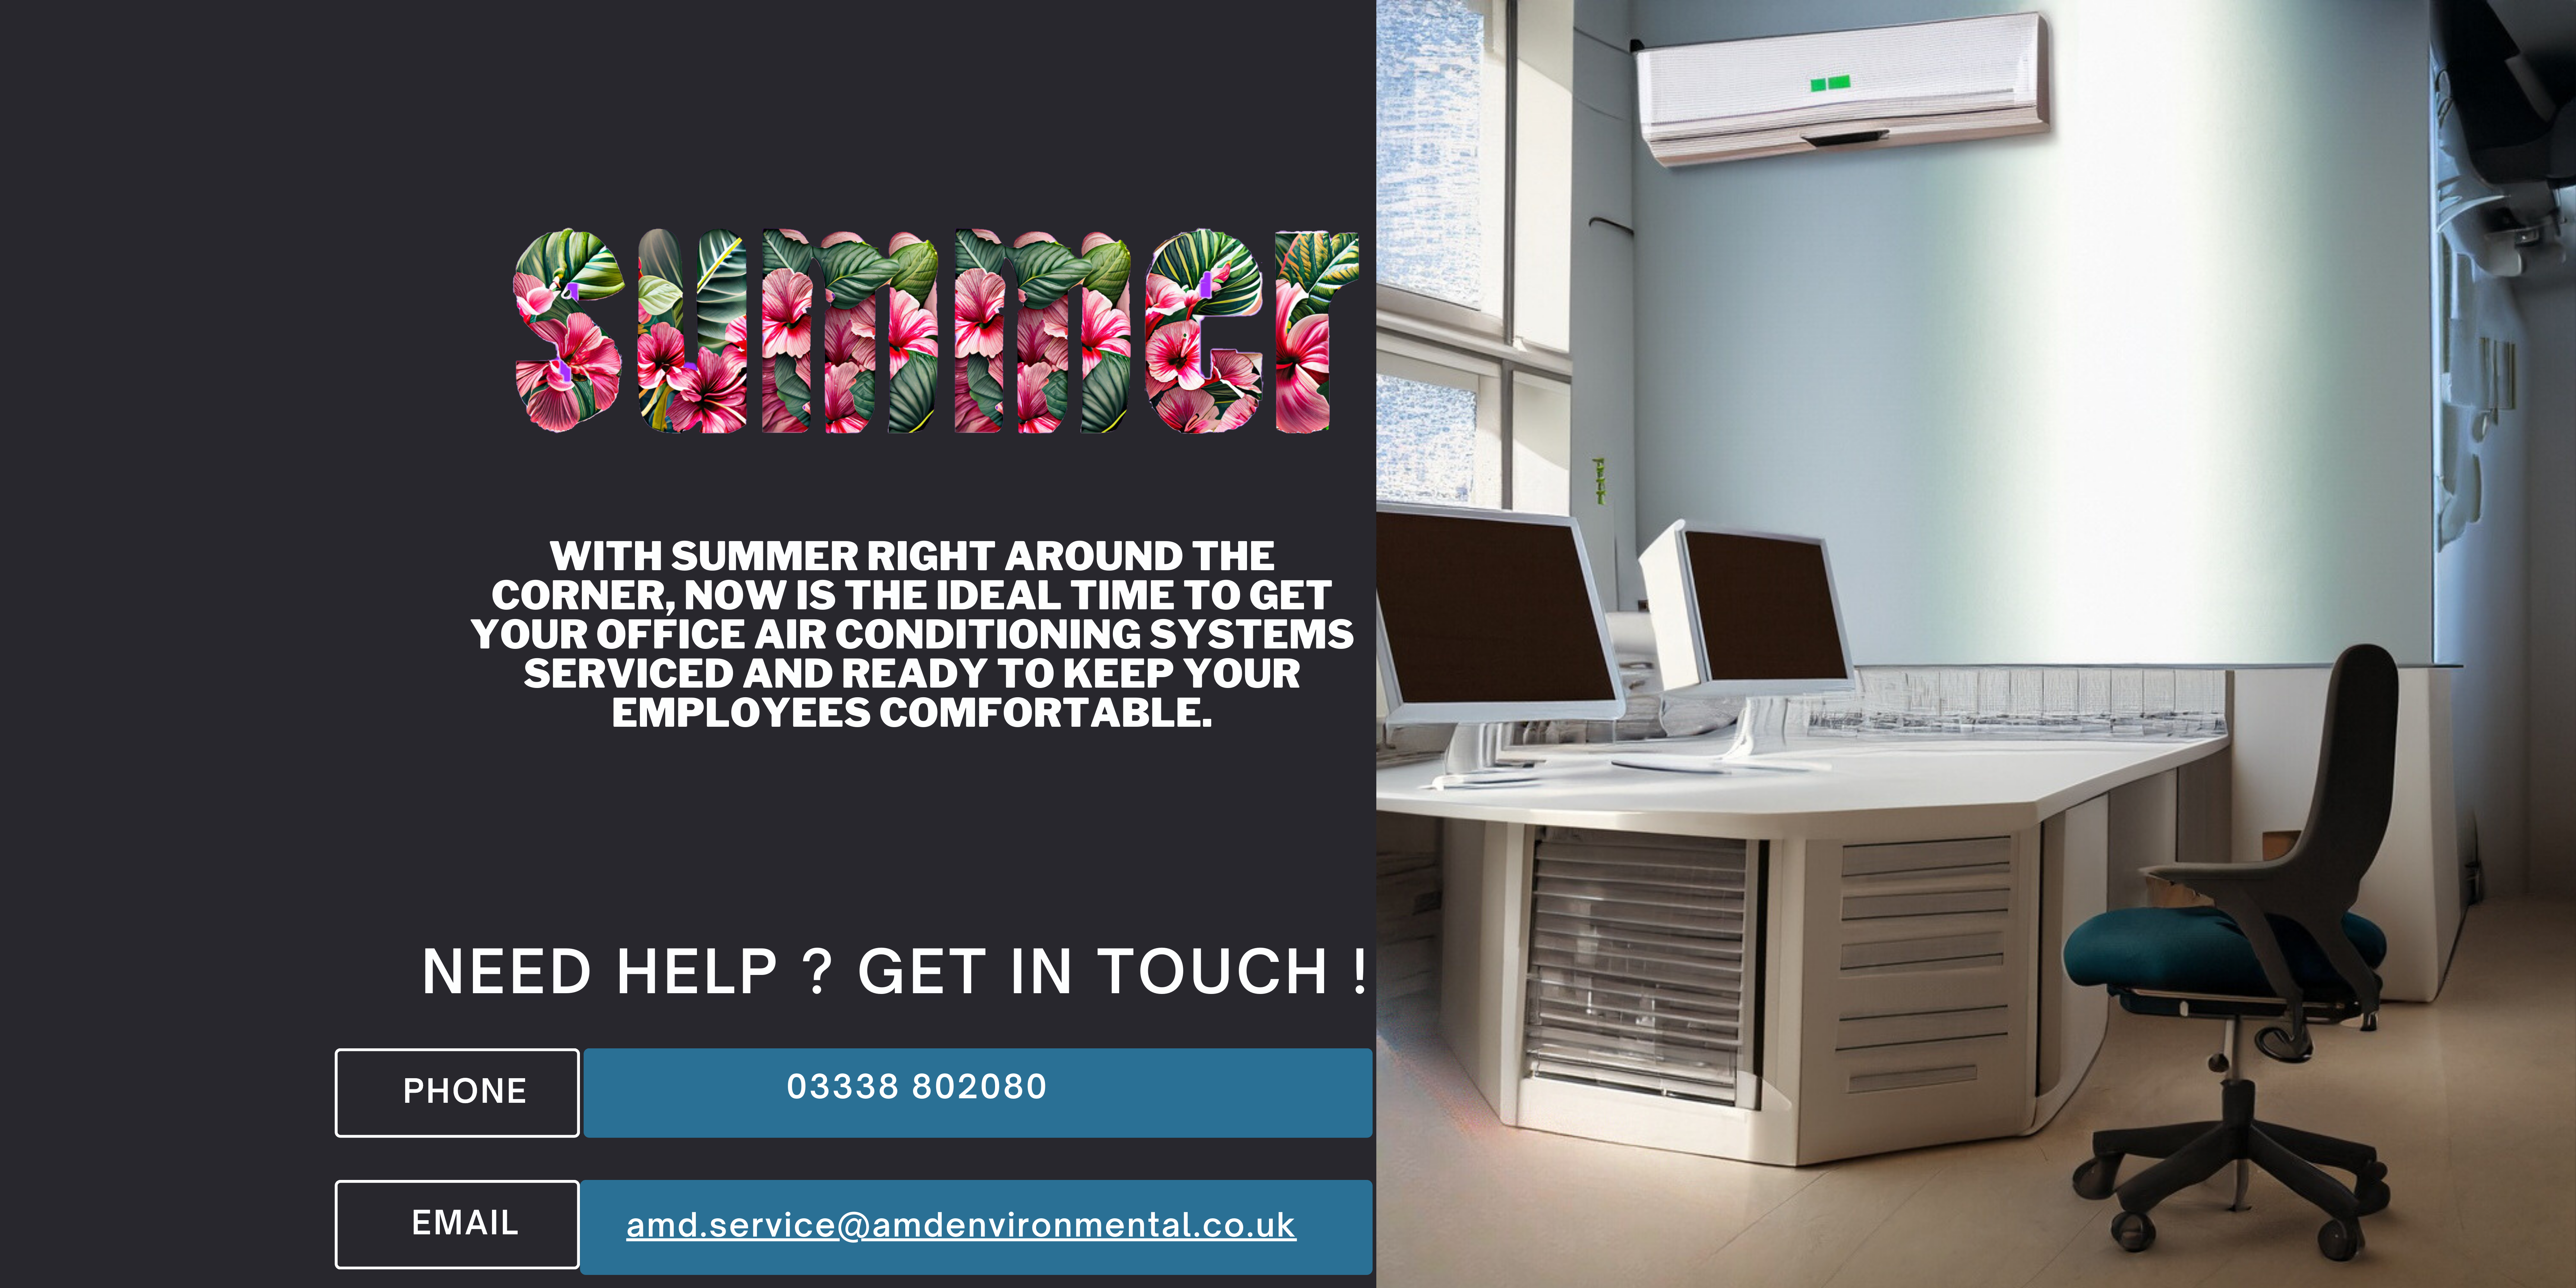 AMD Environmental - Airconditioning Services for Commercial Buildings across the United Kingdom with elments of Net Zero